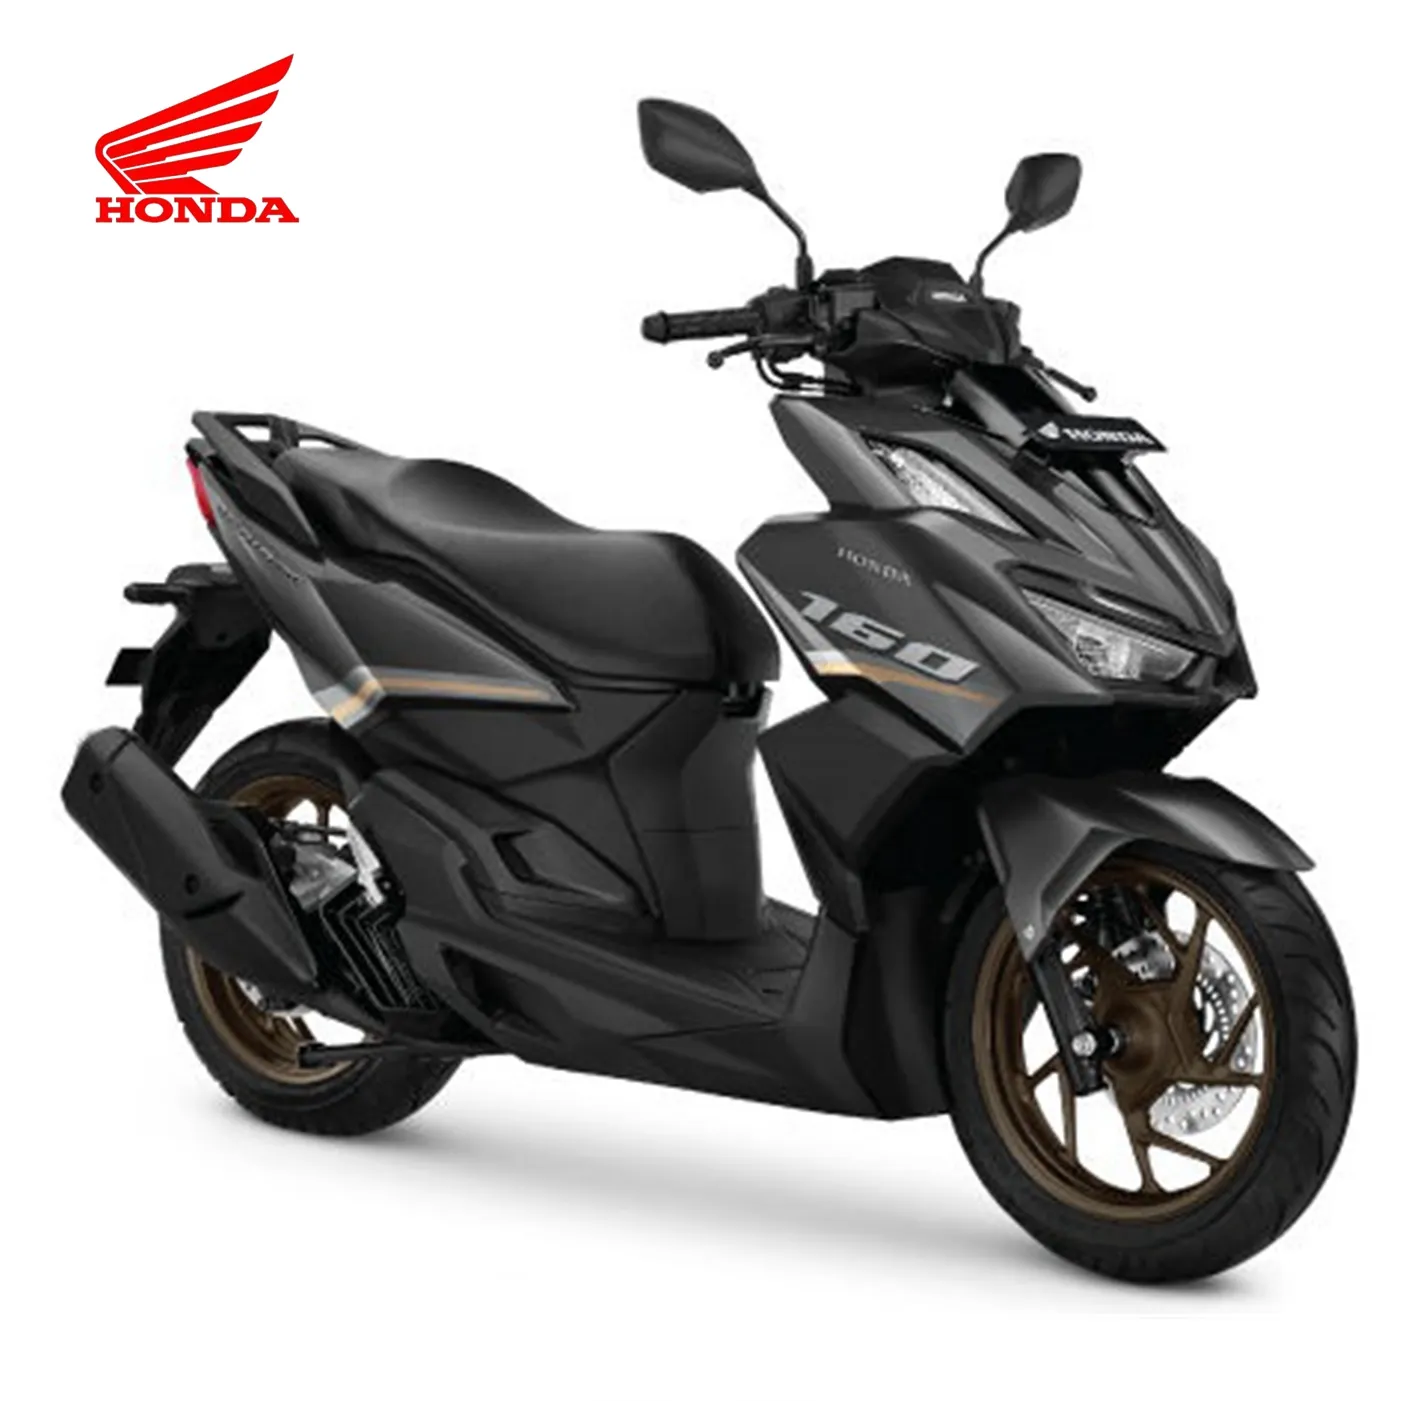 Brand New Indonesia Honda Vario 160 Scooter - Buy Honda Motorcycle,Indonesia Honda Vario 160,Indonesia Honda Vario 160 Scooter Product on Alibaba.com